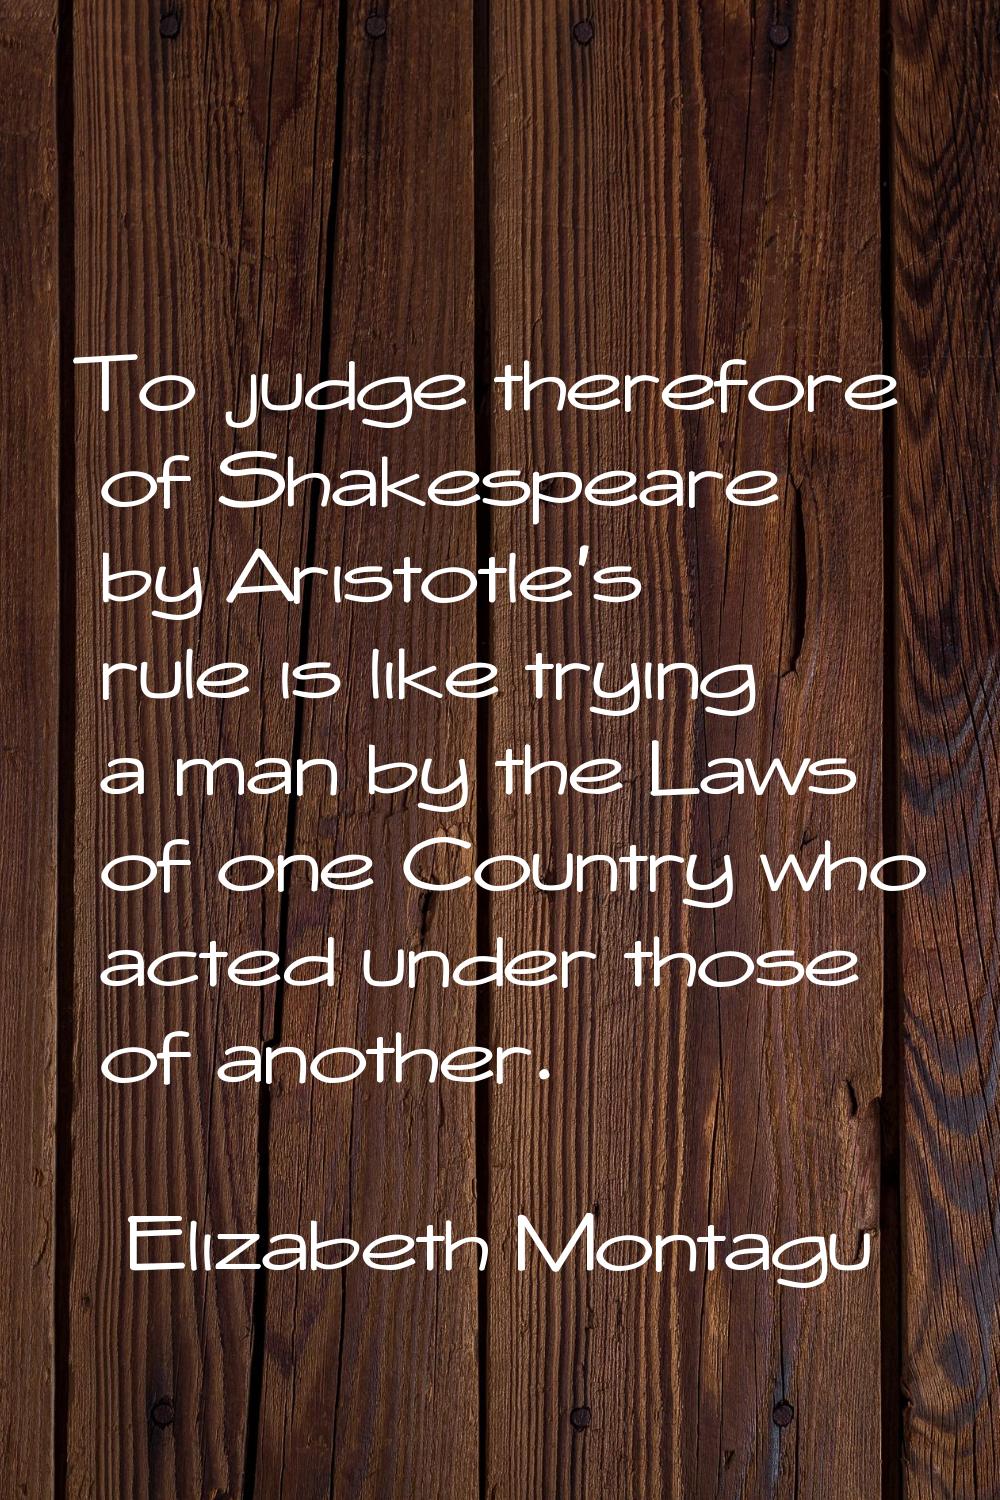 To judge therefore of Shakespeare by Aristotle's rule is like trying a man by the Laws of one Count